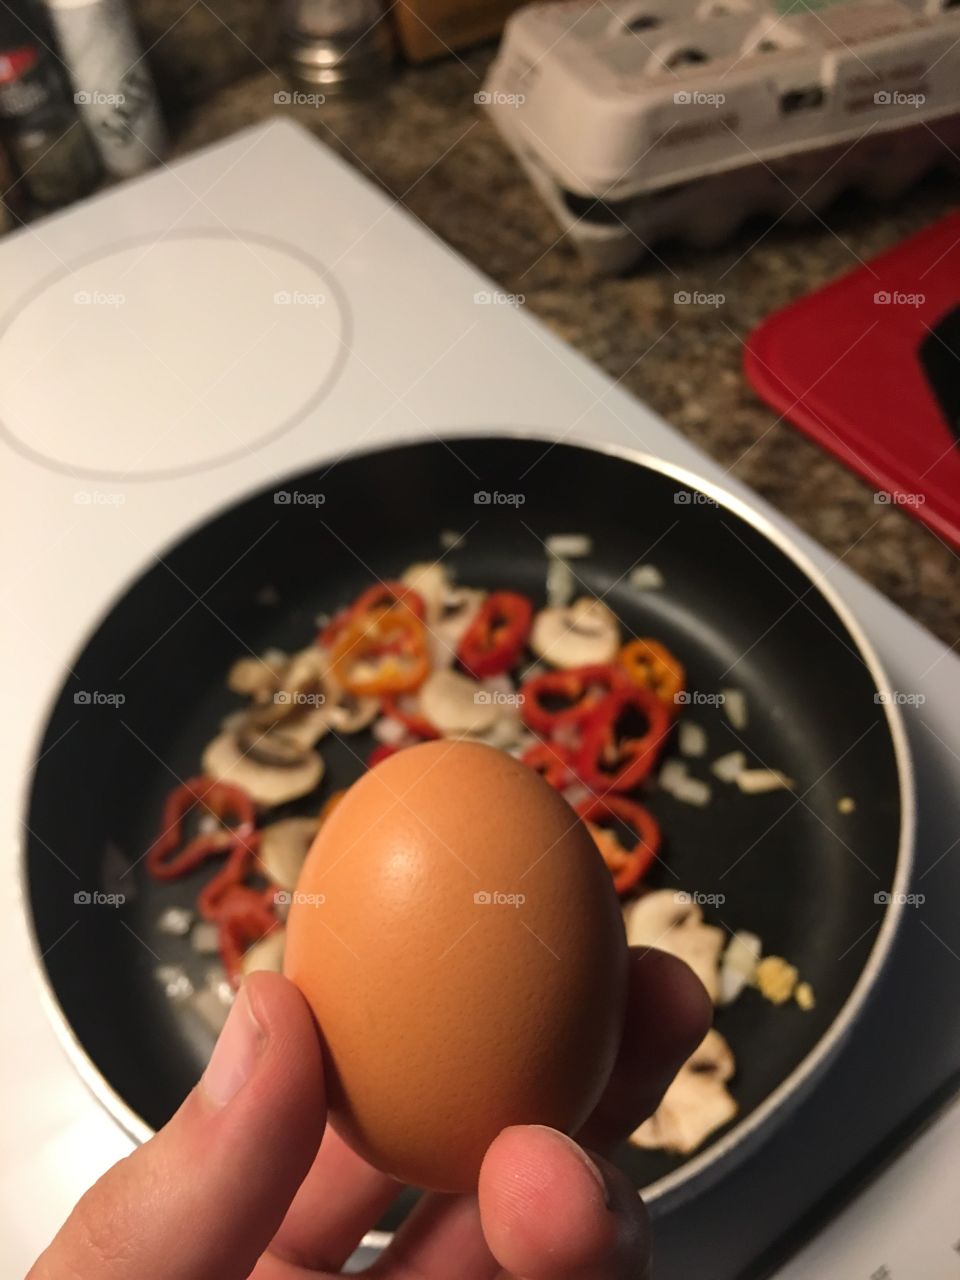 Holding food. An egg. Before being cracked to scramble with some onion mushrooms and peppers. 